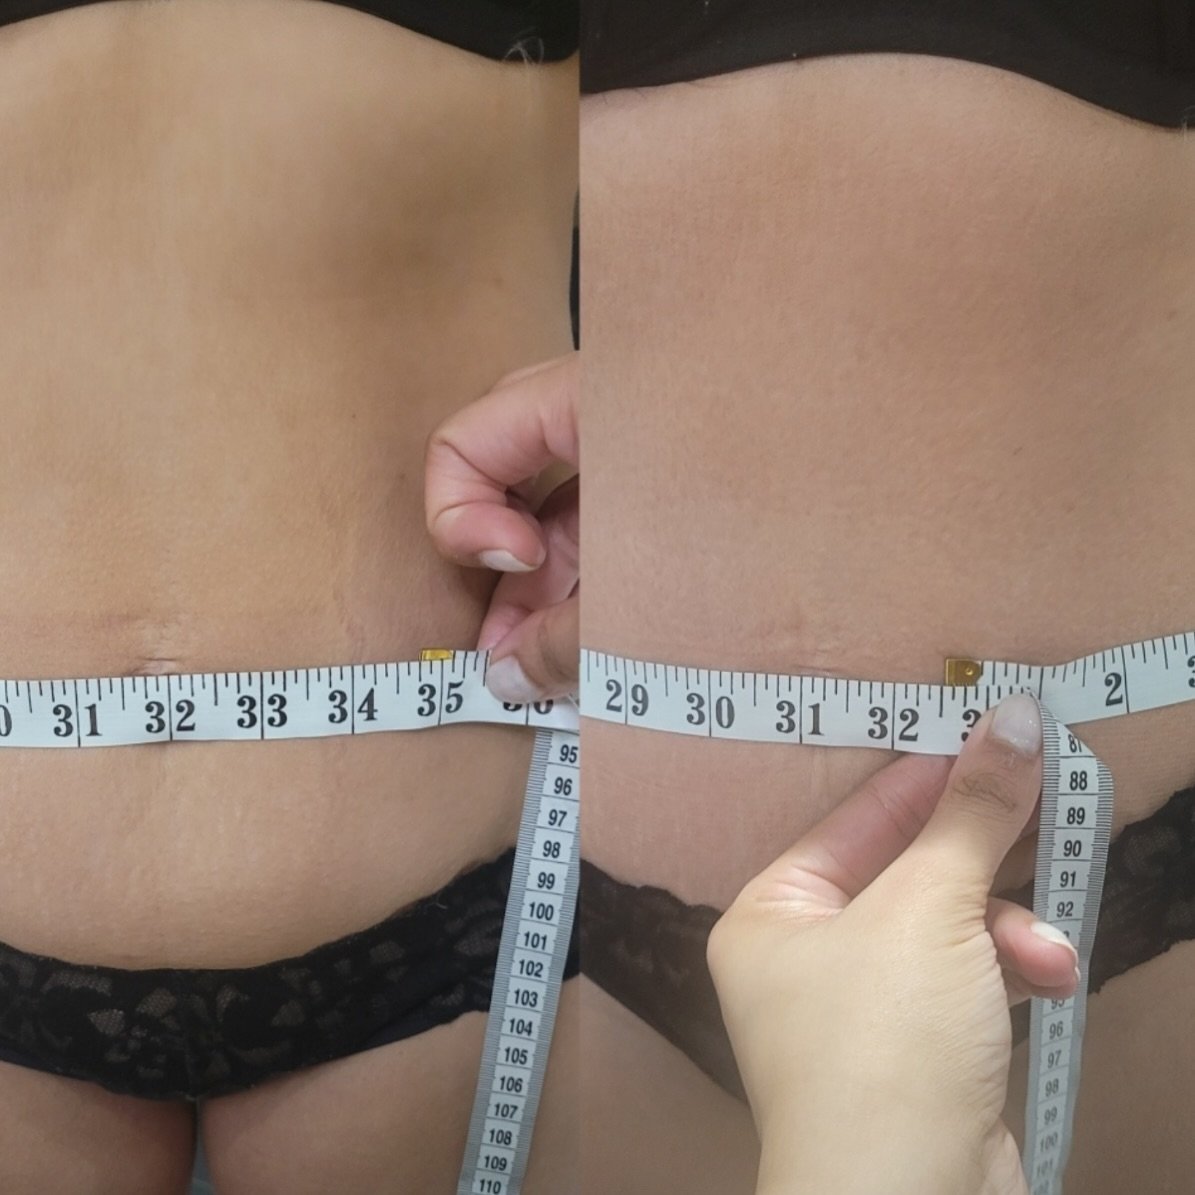 Watching the inches melt off every week! Are you ready for summer!? 

✅ DM to book your appointments
✅ DM about our machine &amp; training 

#tummytuck #nonsurgical #nonsurgicaltummytuck #inchloss #skintightening #collagen #cavitation #radiofrequency